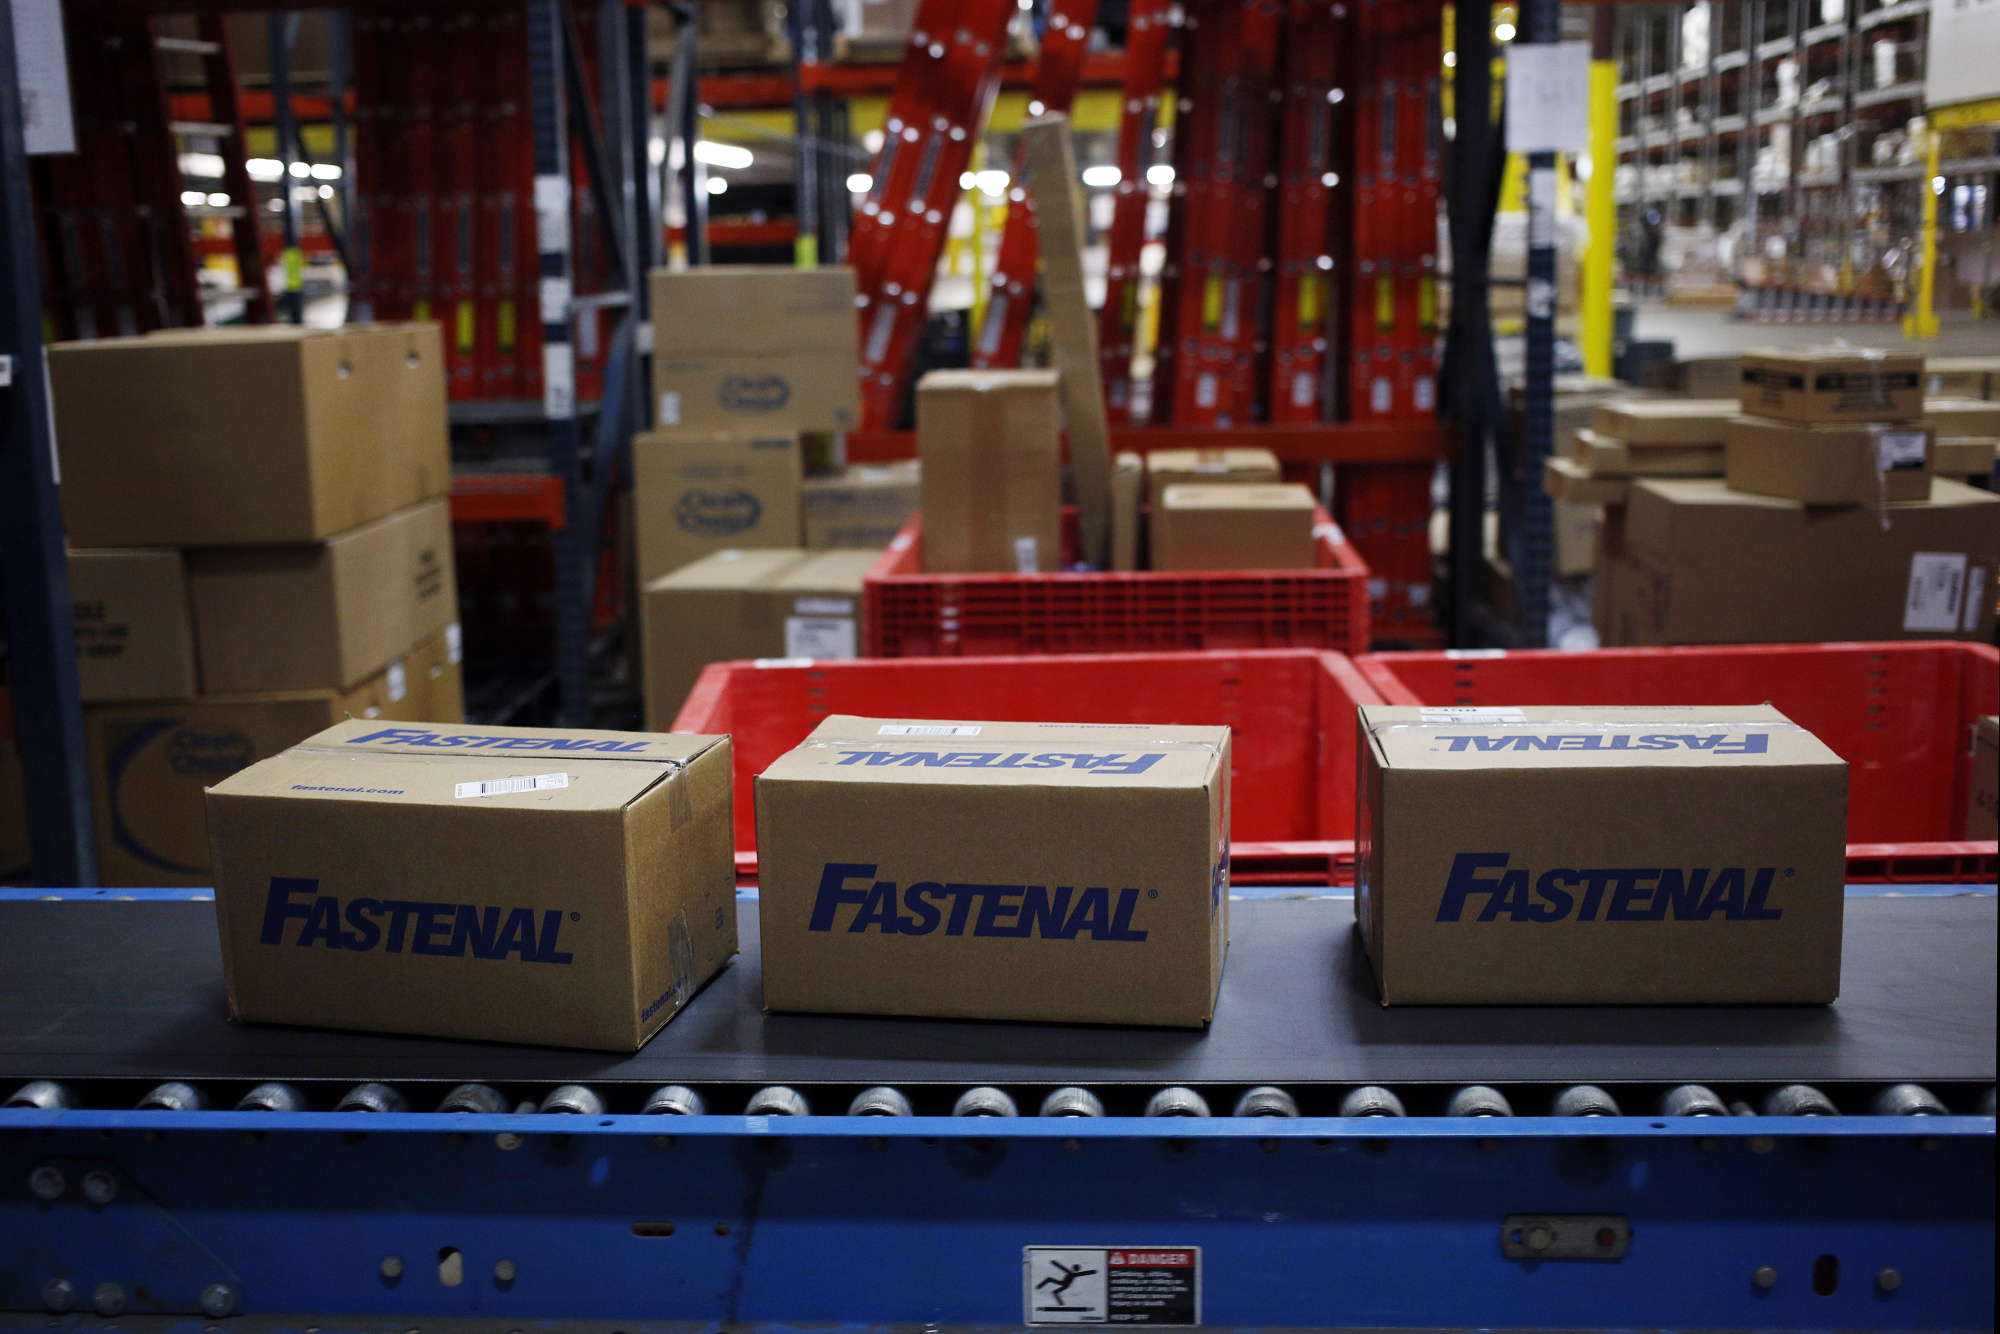 Fastenal Company - Today's heightened (or higher) risk work